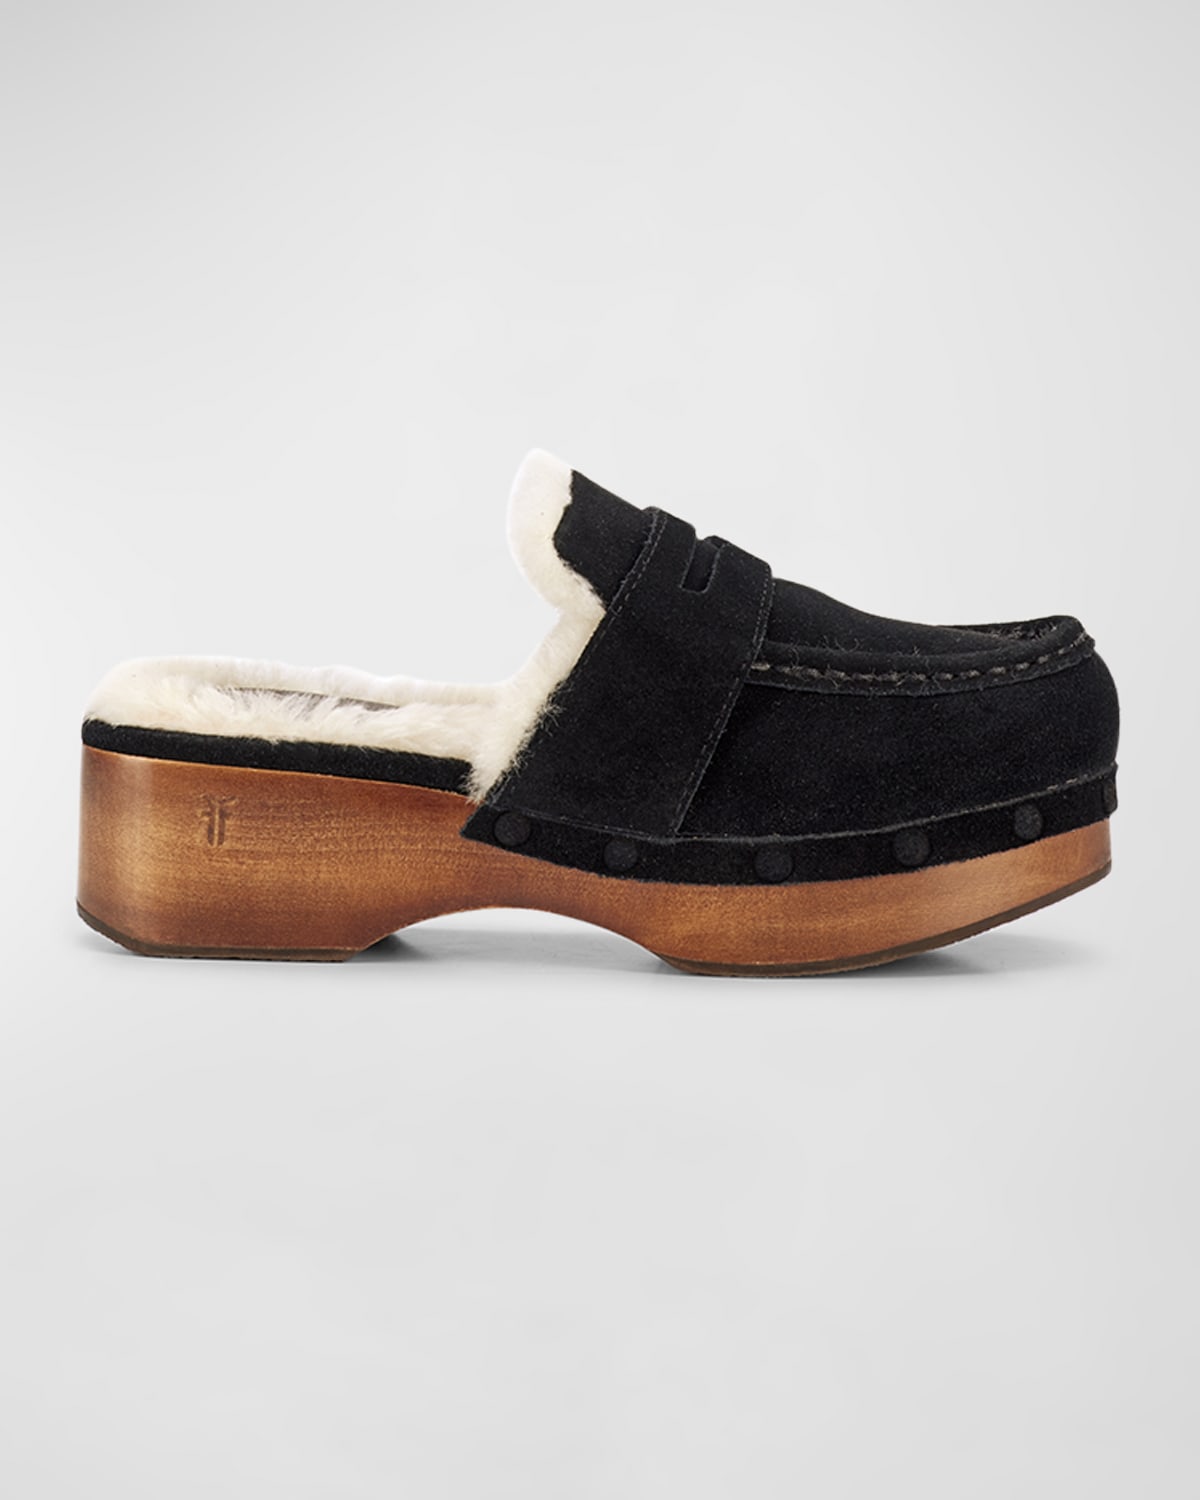 Melody Suede Shearling Penny Loafer Clogs